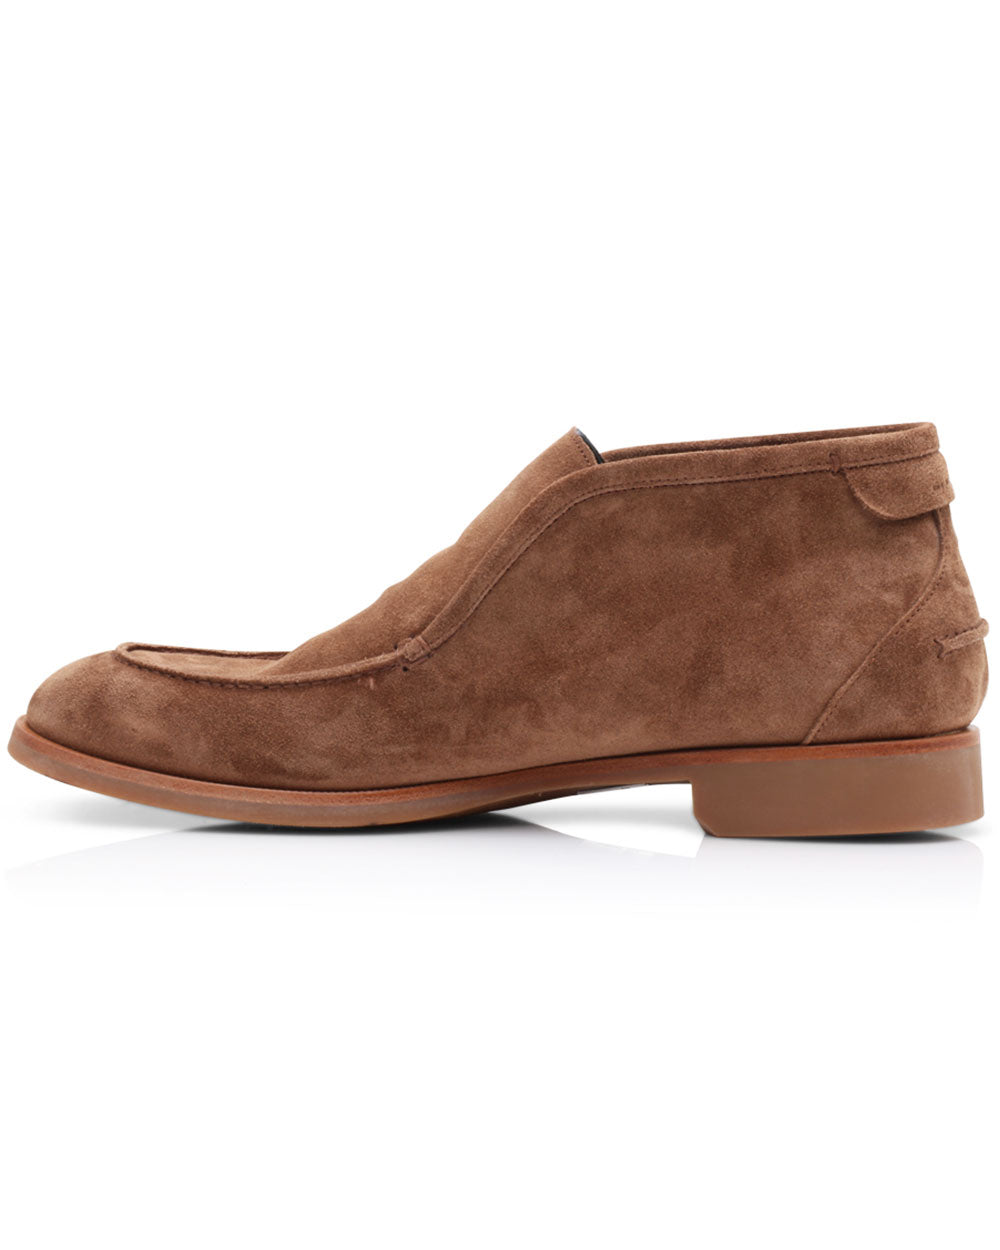 Suede Fidenza Slip On Ankle Boot in Tan